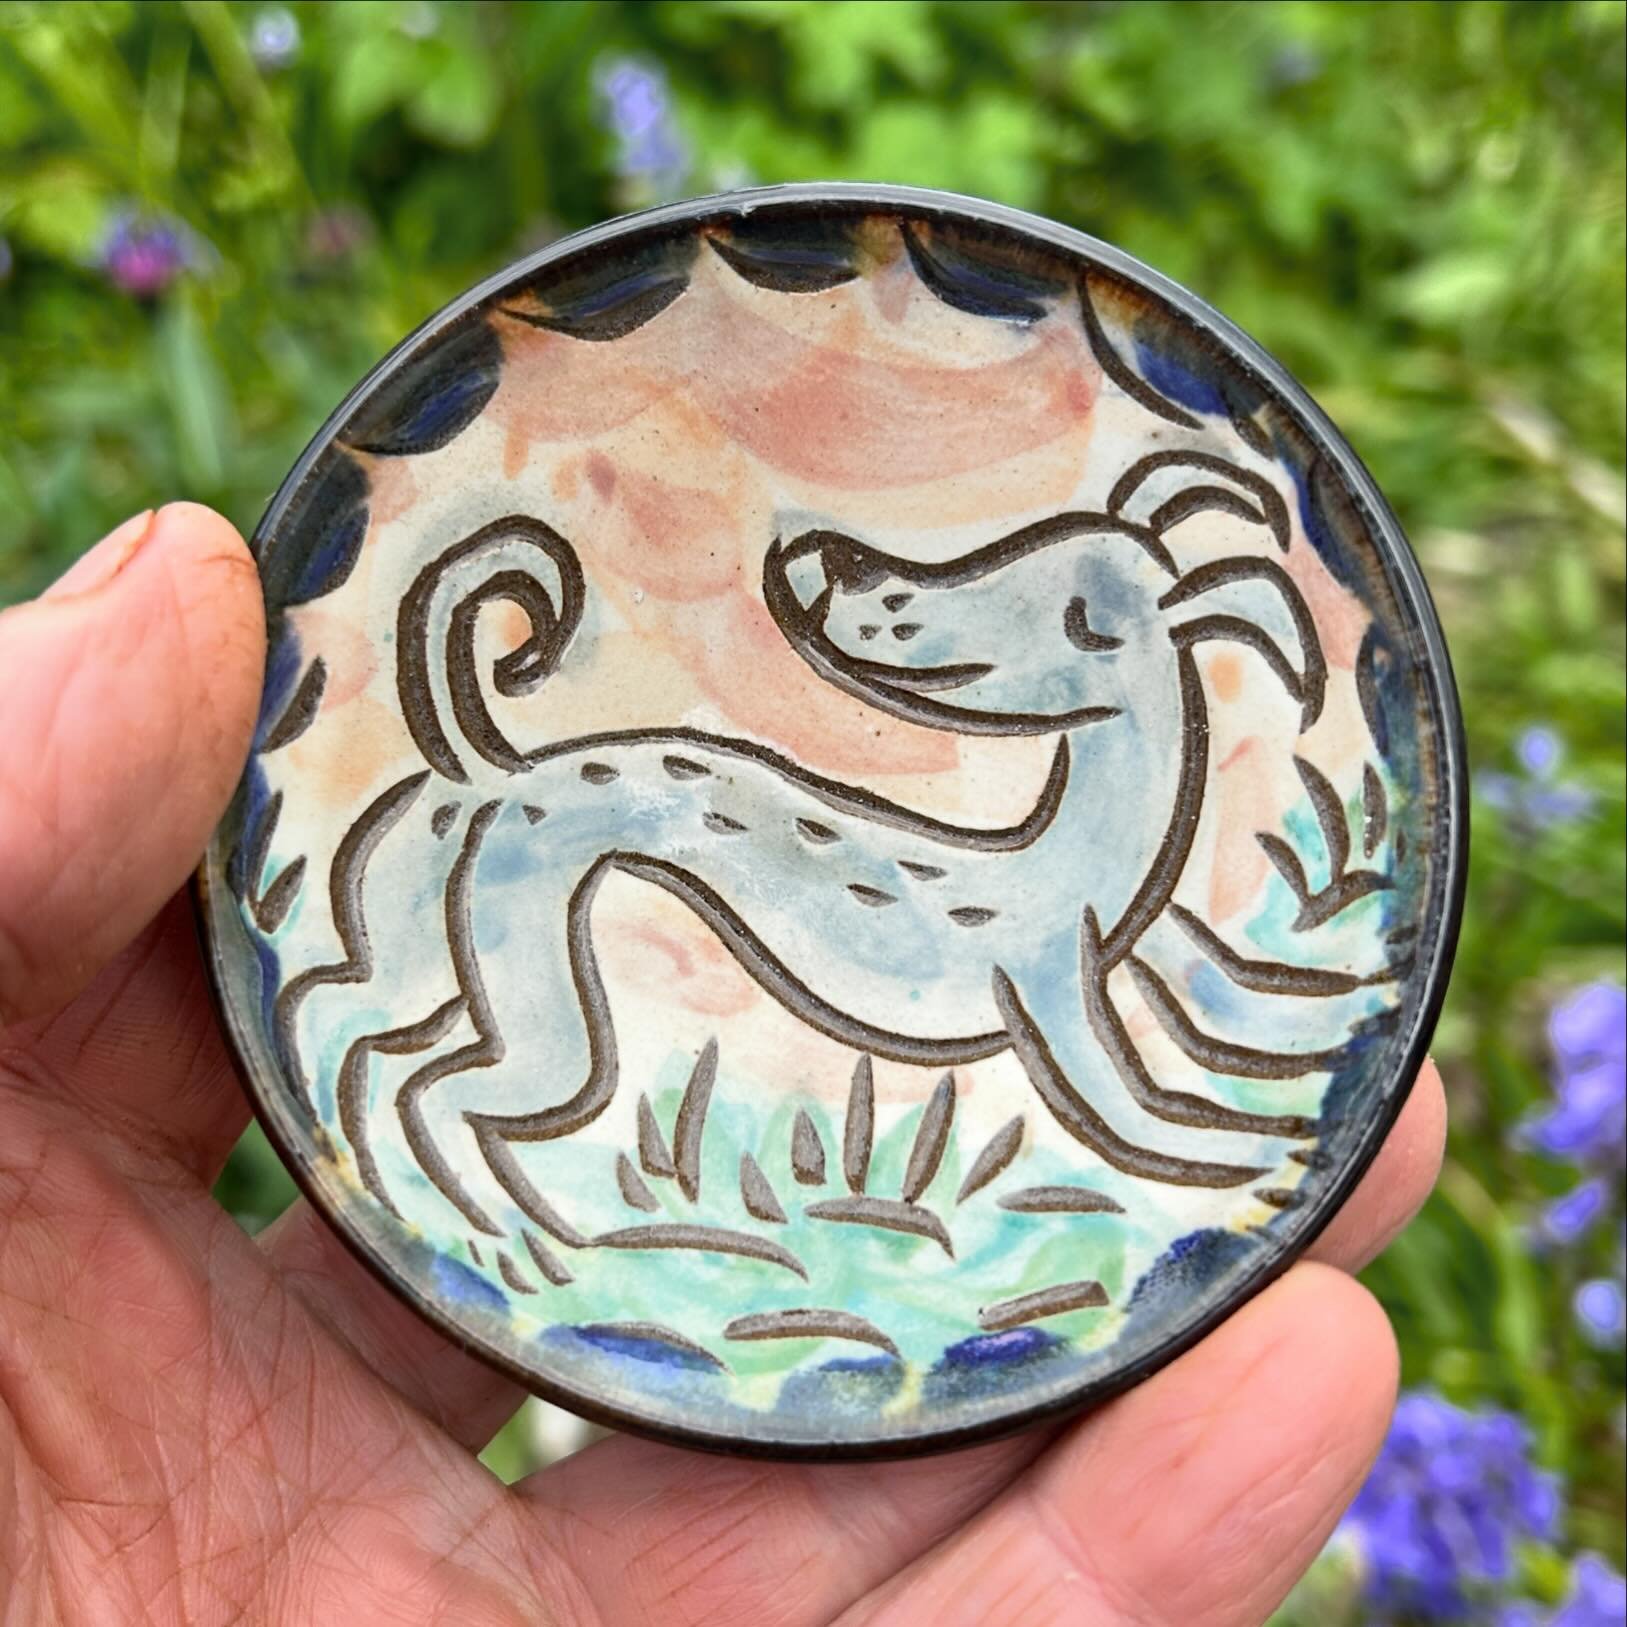 Blue whippet on a little dishy. Lots of new small dishes and bowls on the webshop. Carved and painted stoneware with dark brown glaze on reverse.
.
#stoneware #pottery #whippet #dog #lurcher #ceramics